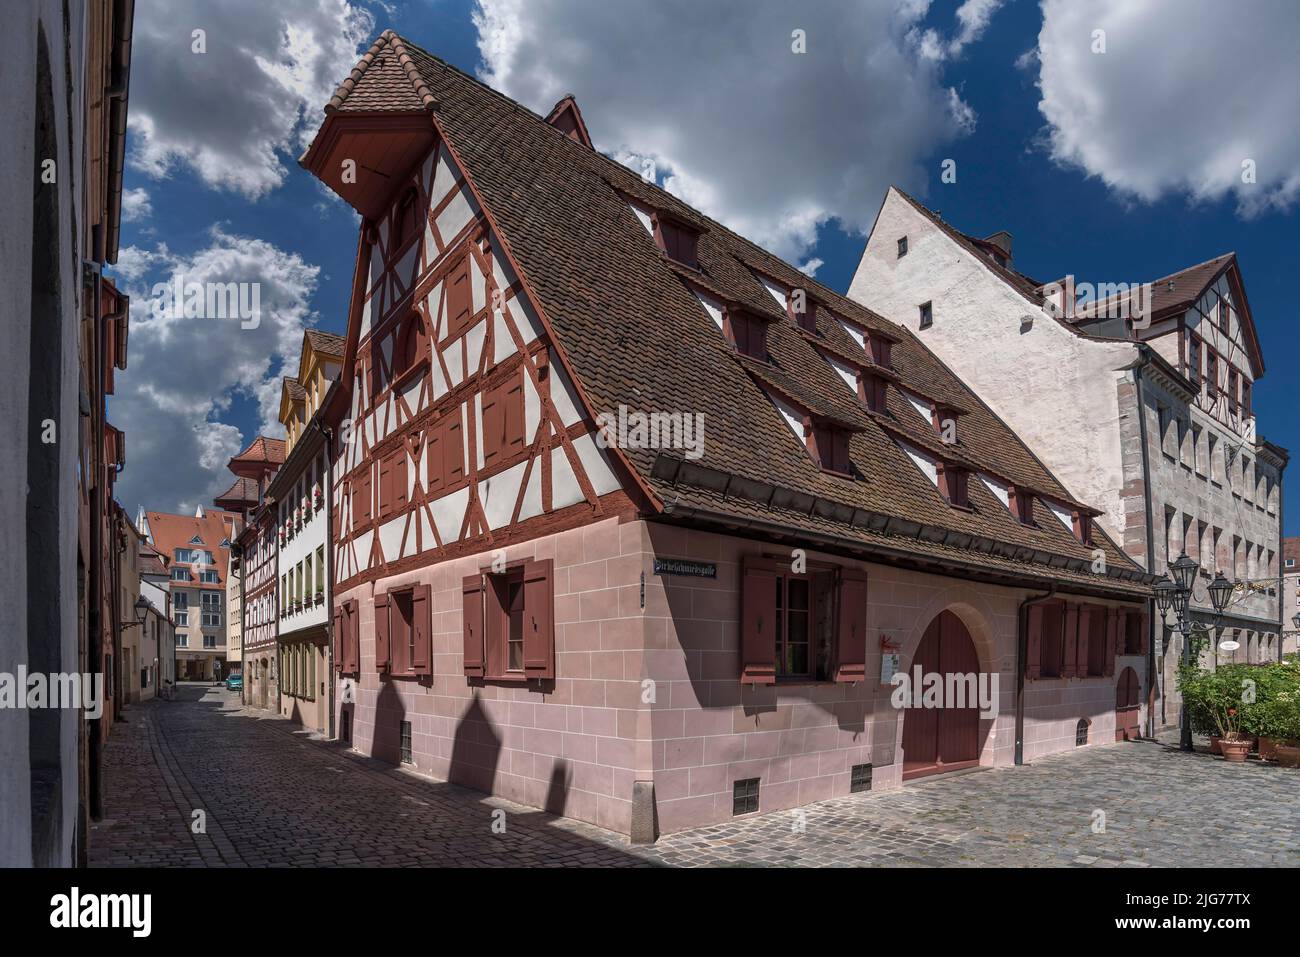 Historic half-timbered house, now a cultural barn, completely renovated by the Friends of the Old Town, Zirkelschmiedsgasse 30, Pfeifergasse 6, 7 and Stock Photo